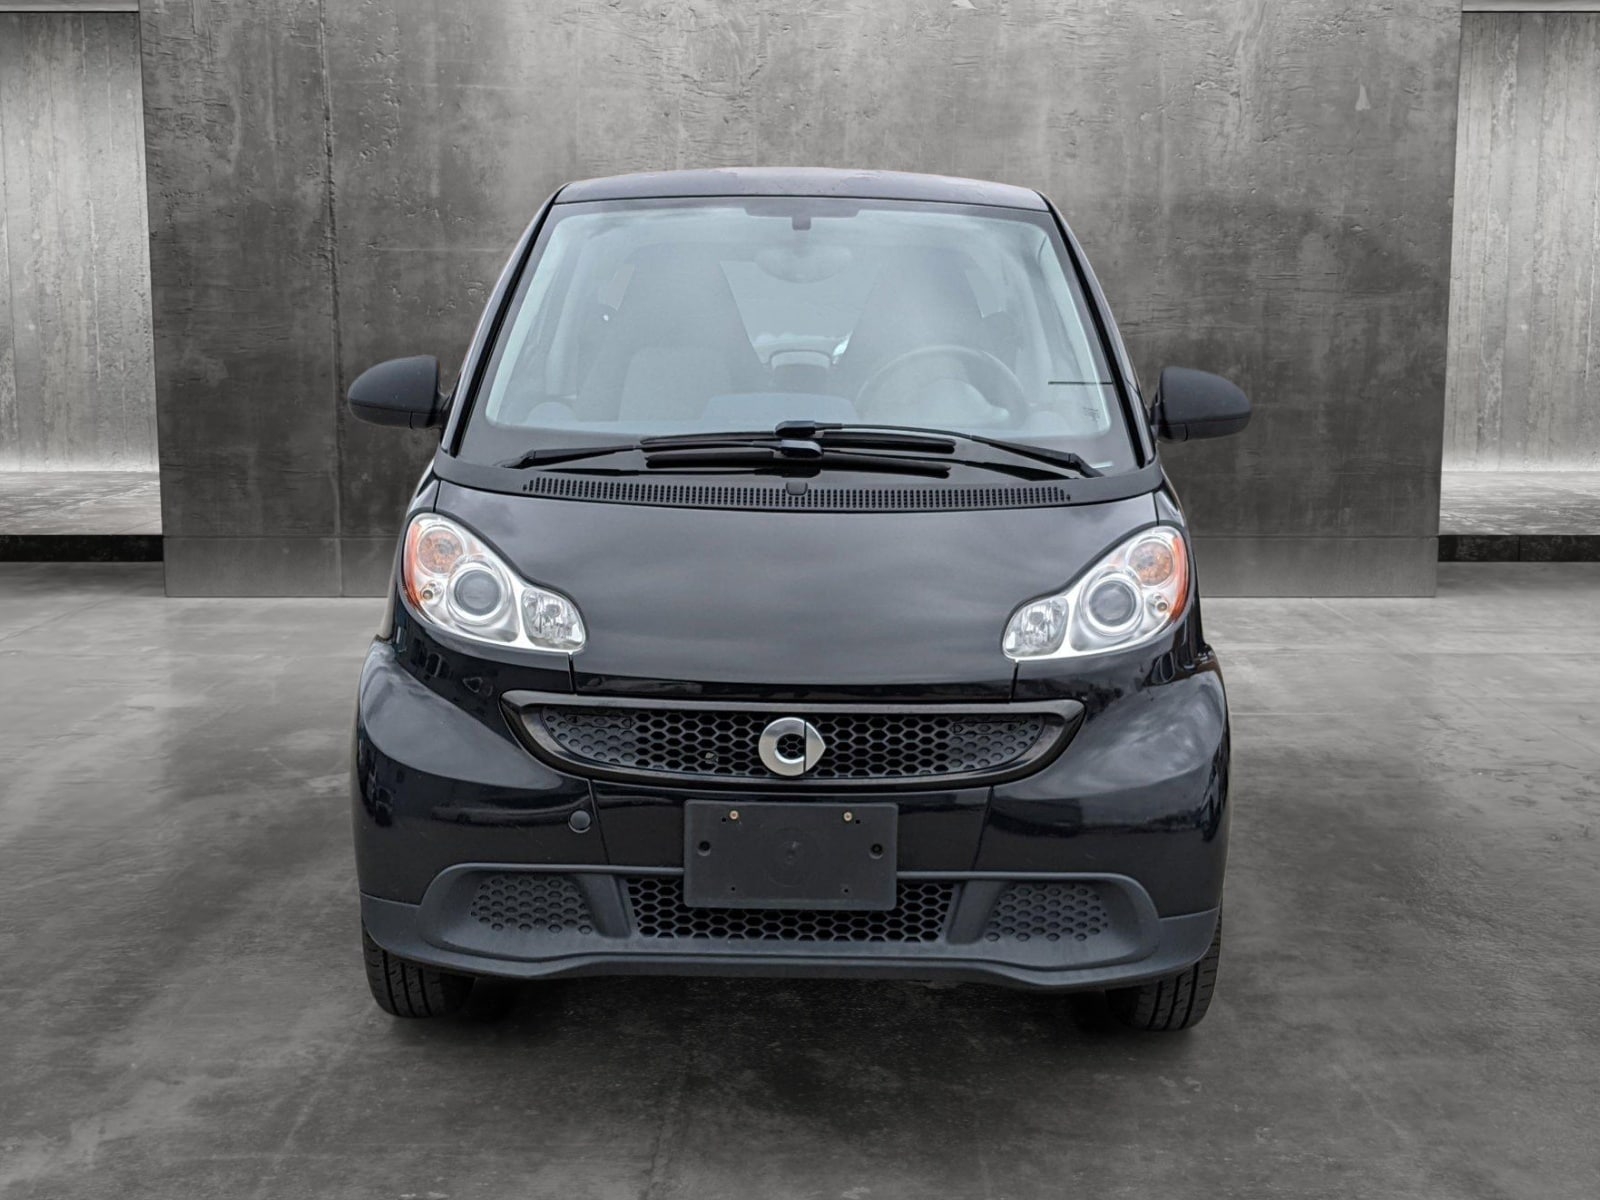 Used 2015 smart fortwo pure with VIN WMEEJ3BA6FK800181 for sale in Colorado Springs, CO